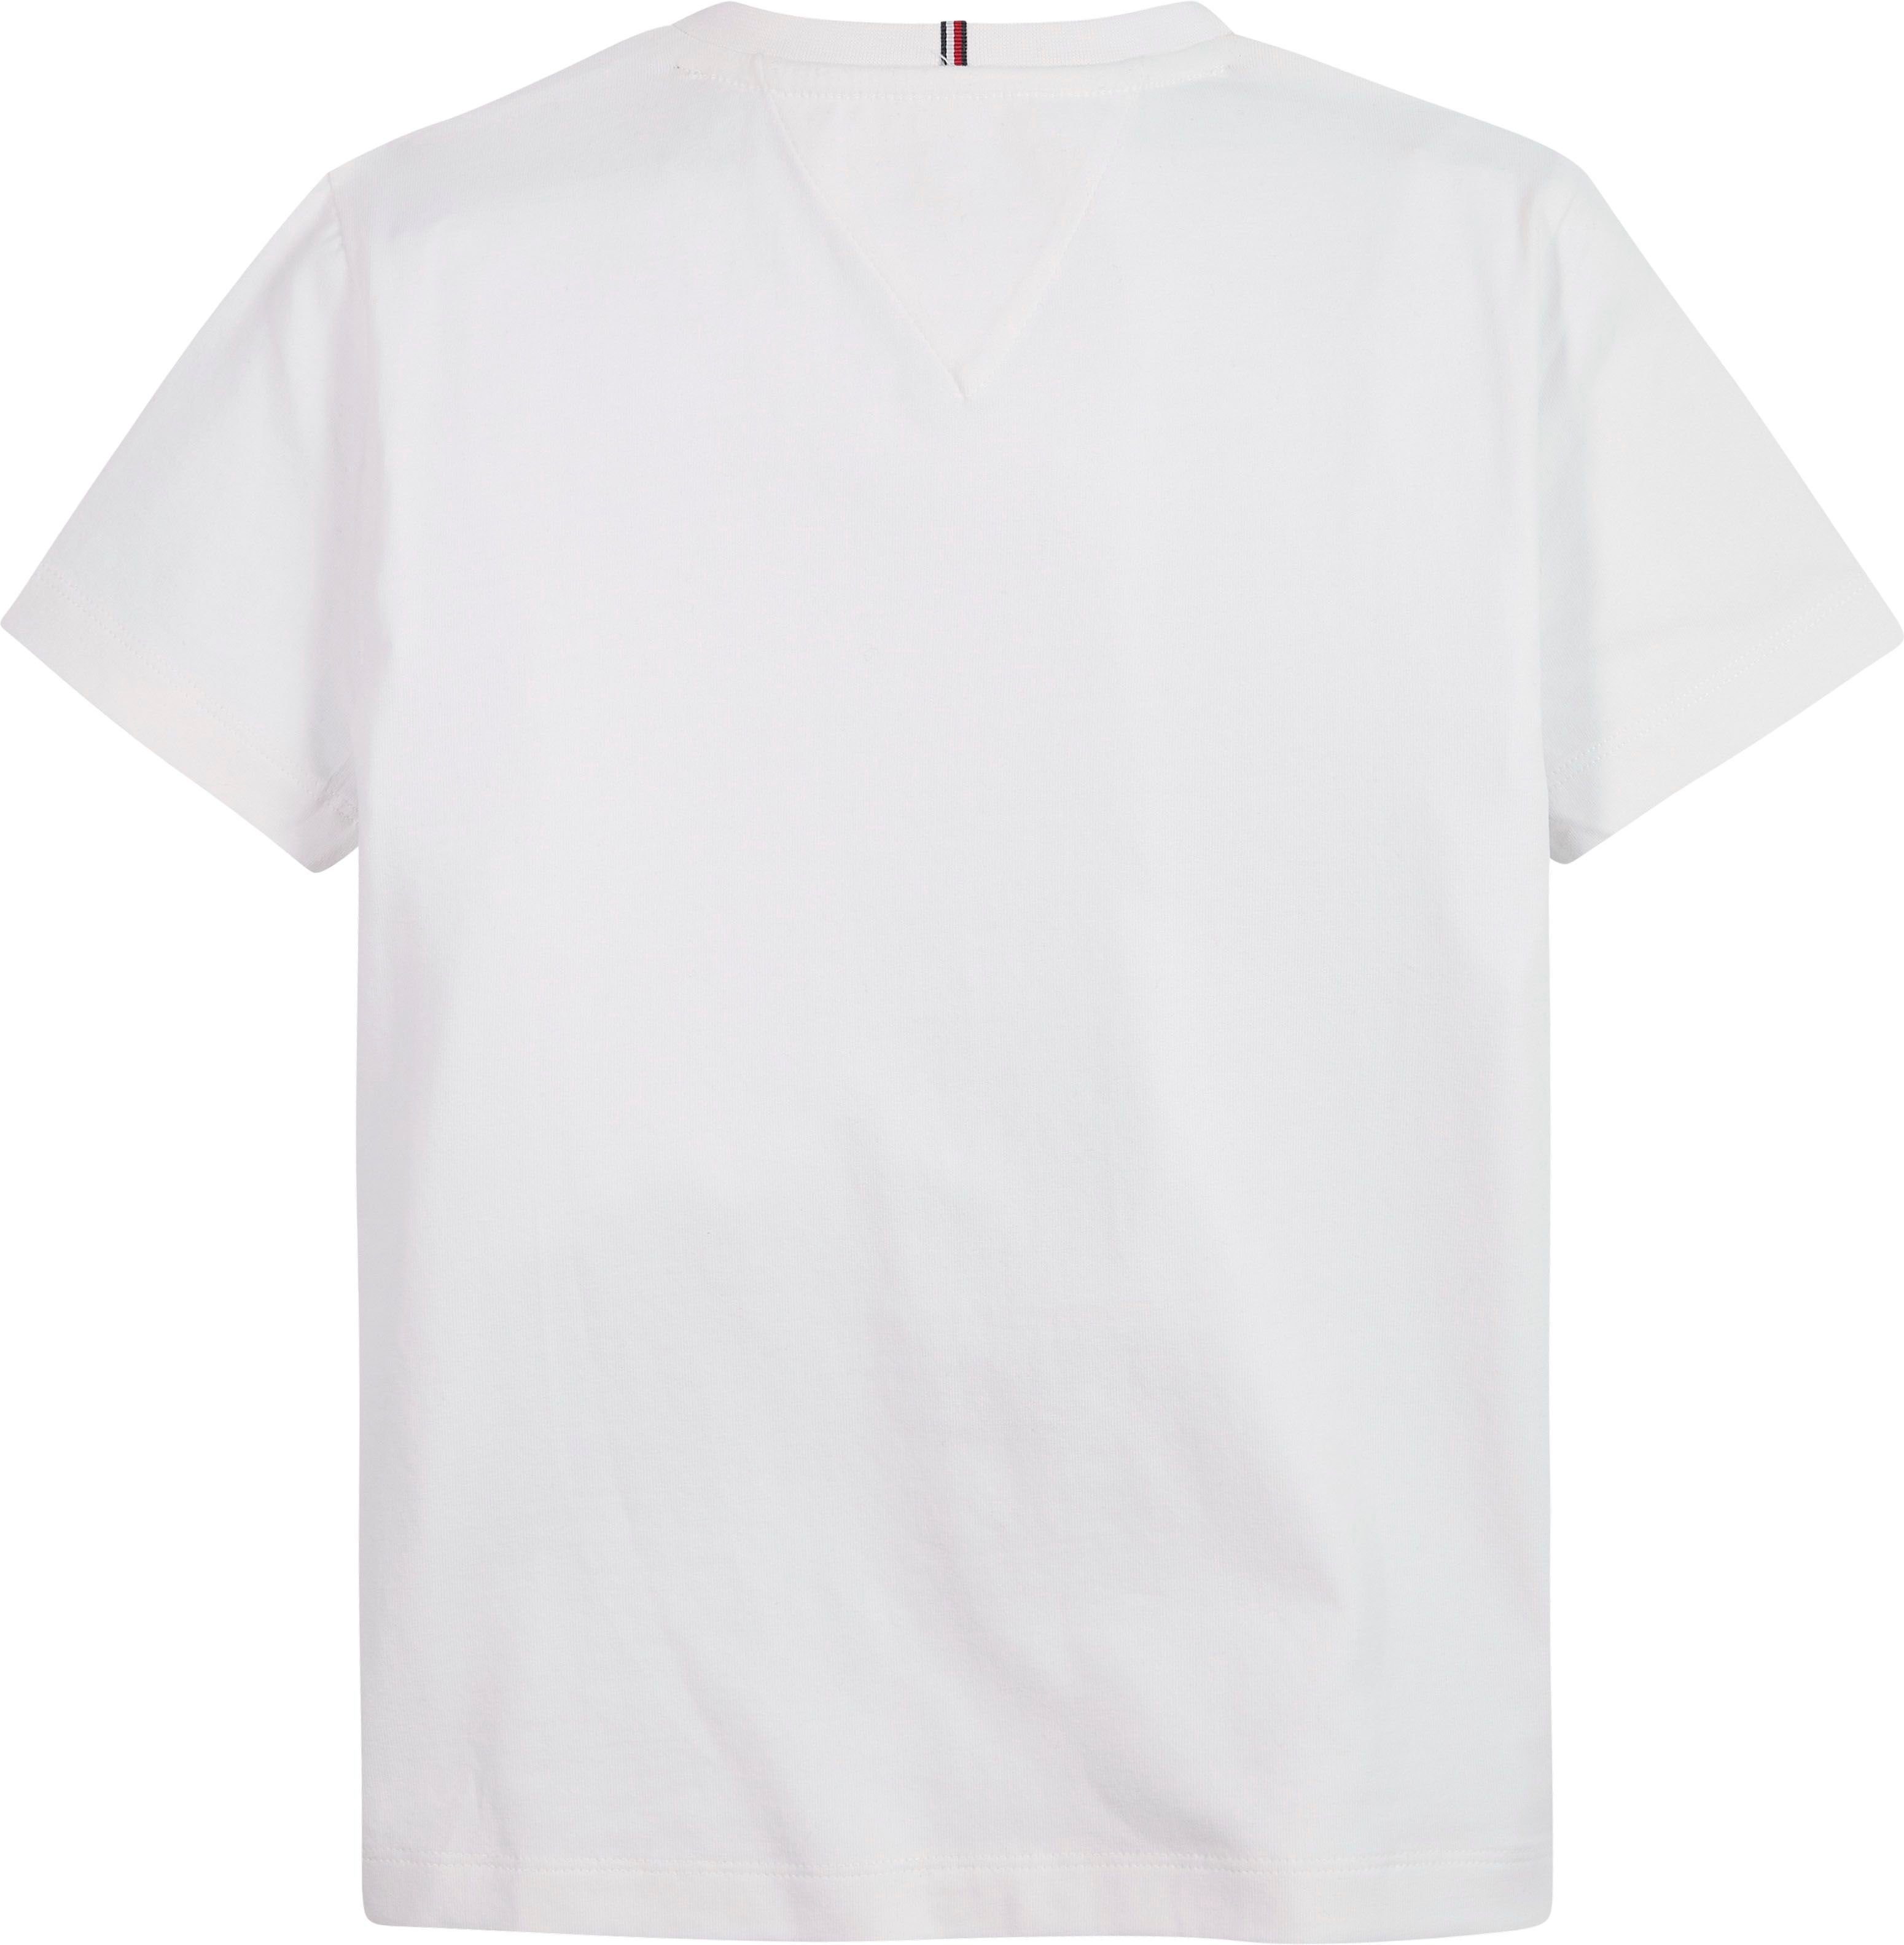 Tommy Hilfiger GRAPHIC T-Shirt MULTI S/S White TEE TOMMY Logostickerei mit